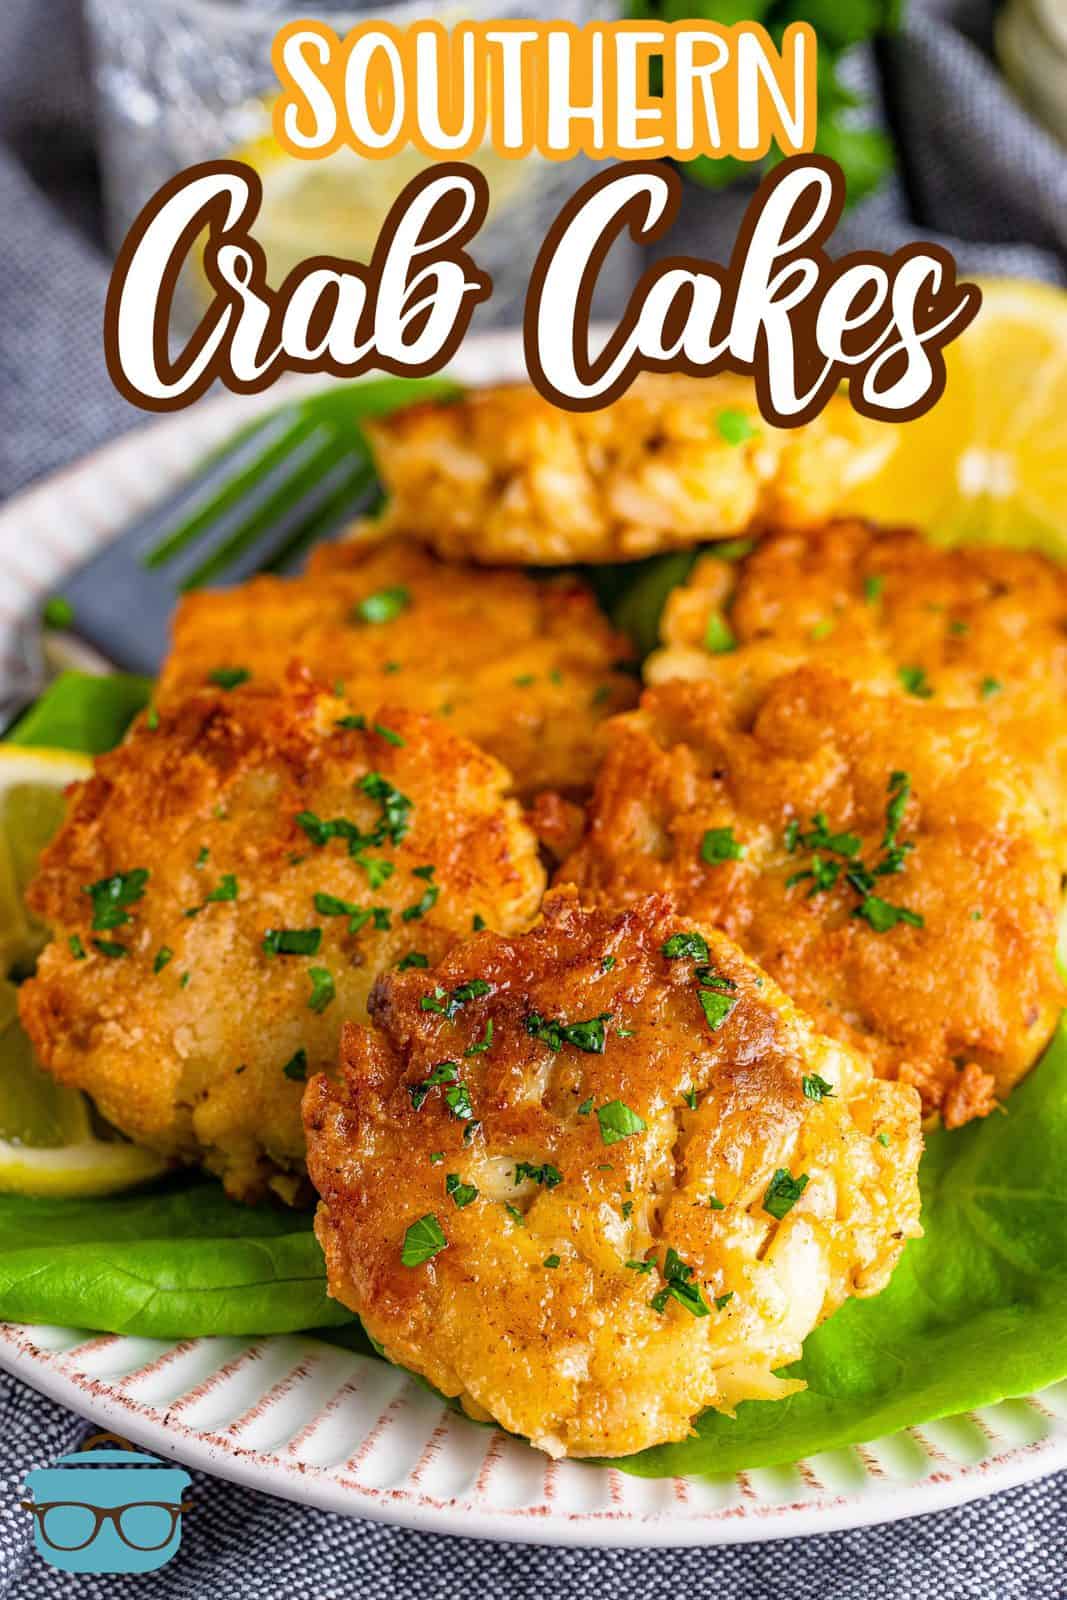 Pinterest image of stacked Southern Crab Cakes on lettuce on white plate.